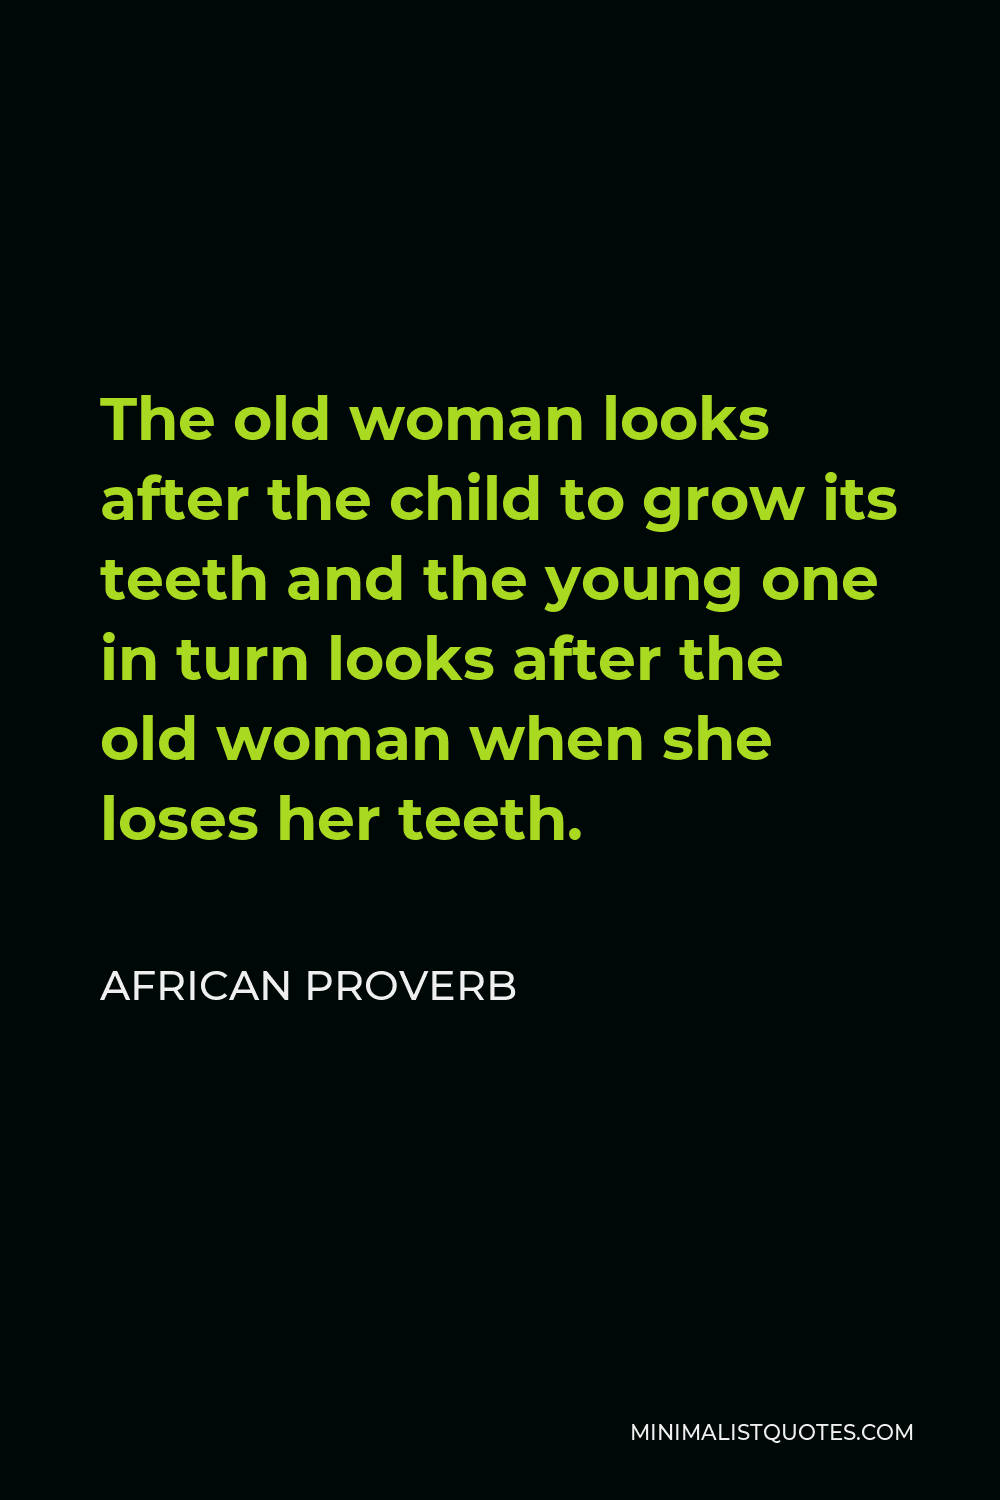 African Proverb Quote - The old woman looks after the child to grow its teeth and the young one in turn looks after the old woman when she loses her teeth.